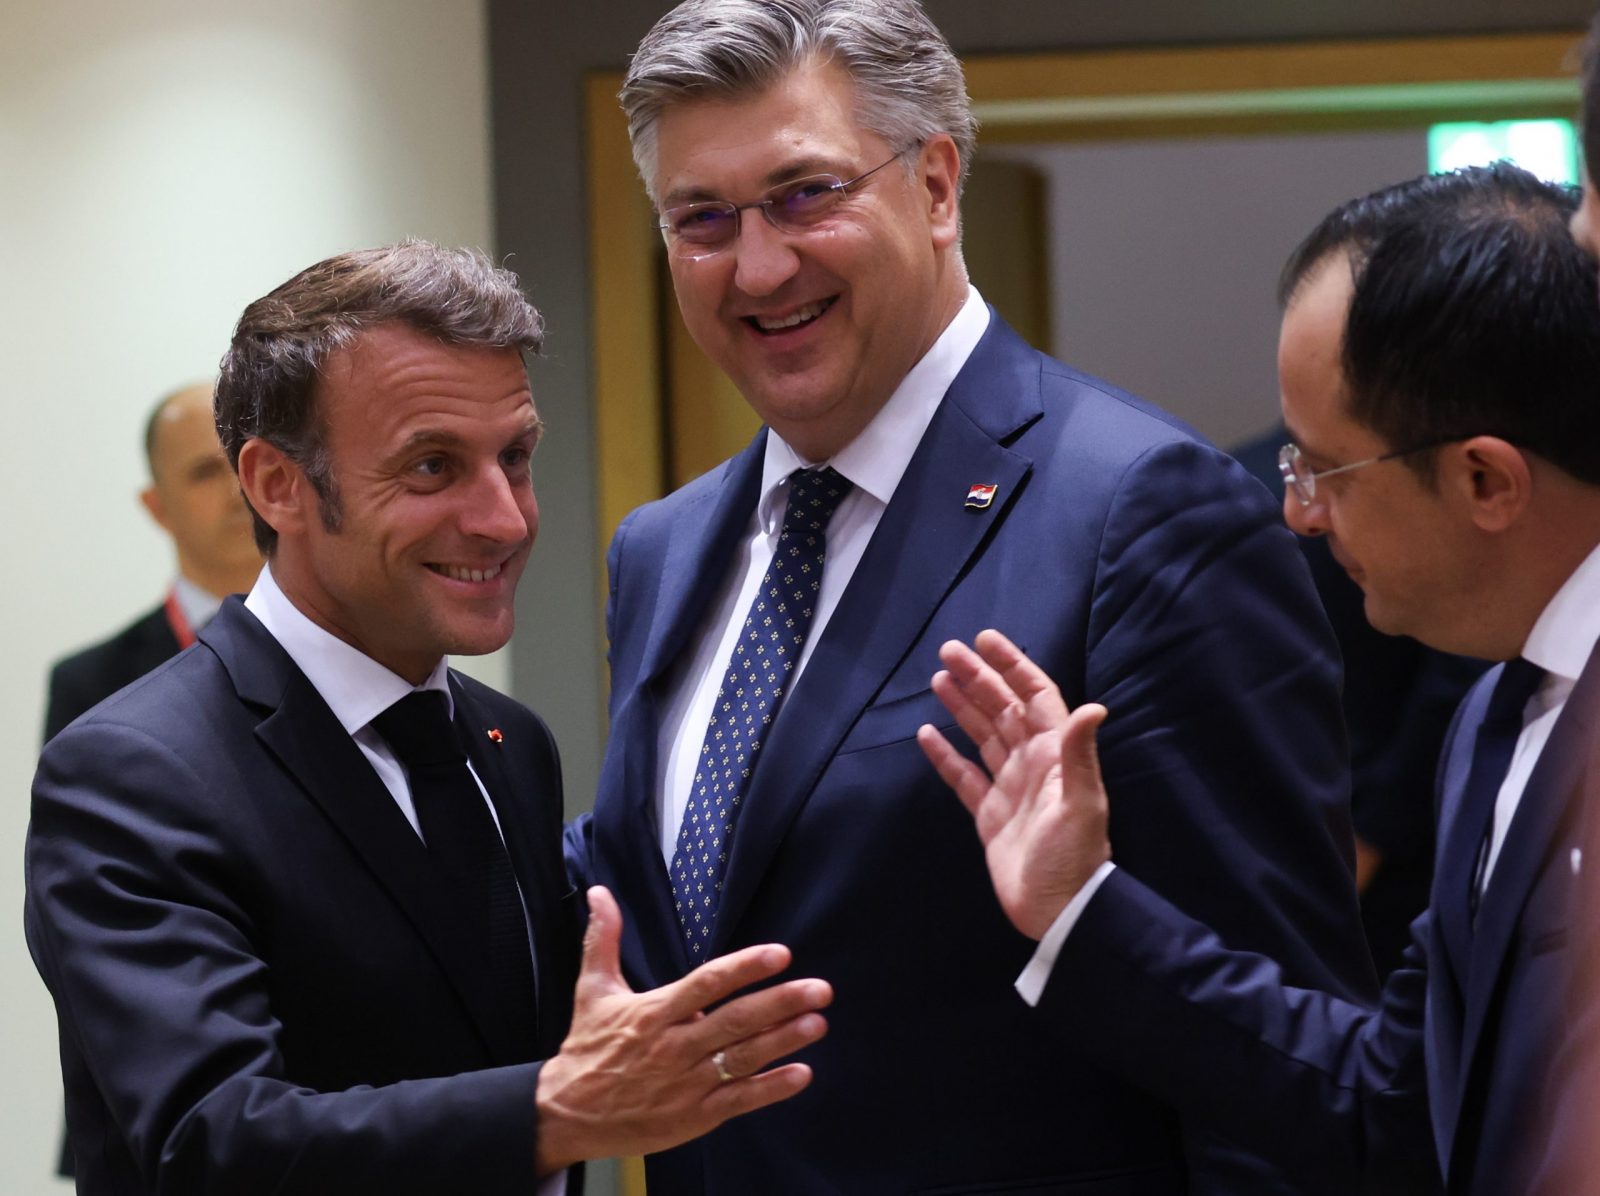 epa10717276 (L-R) French President Emmanuel Macron, Croatian Prime Minister Andrej Plenkovic and President of the Republic of Cyprus Nicos Christodoulides during a European Council in Brussels, Belgium, 29 June 2023. EU leaders are gathering in Brussels for a two-day summit to discuss the latest developments in relation to Russia's invasion of Ukraine and continued EU support for Ukraine as well as the block's economy, security, migration and external relations, among other topics.  EPA/OLIVIER HOSLET